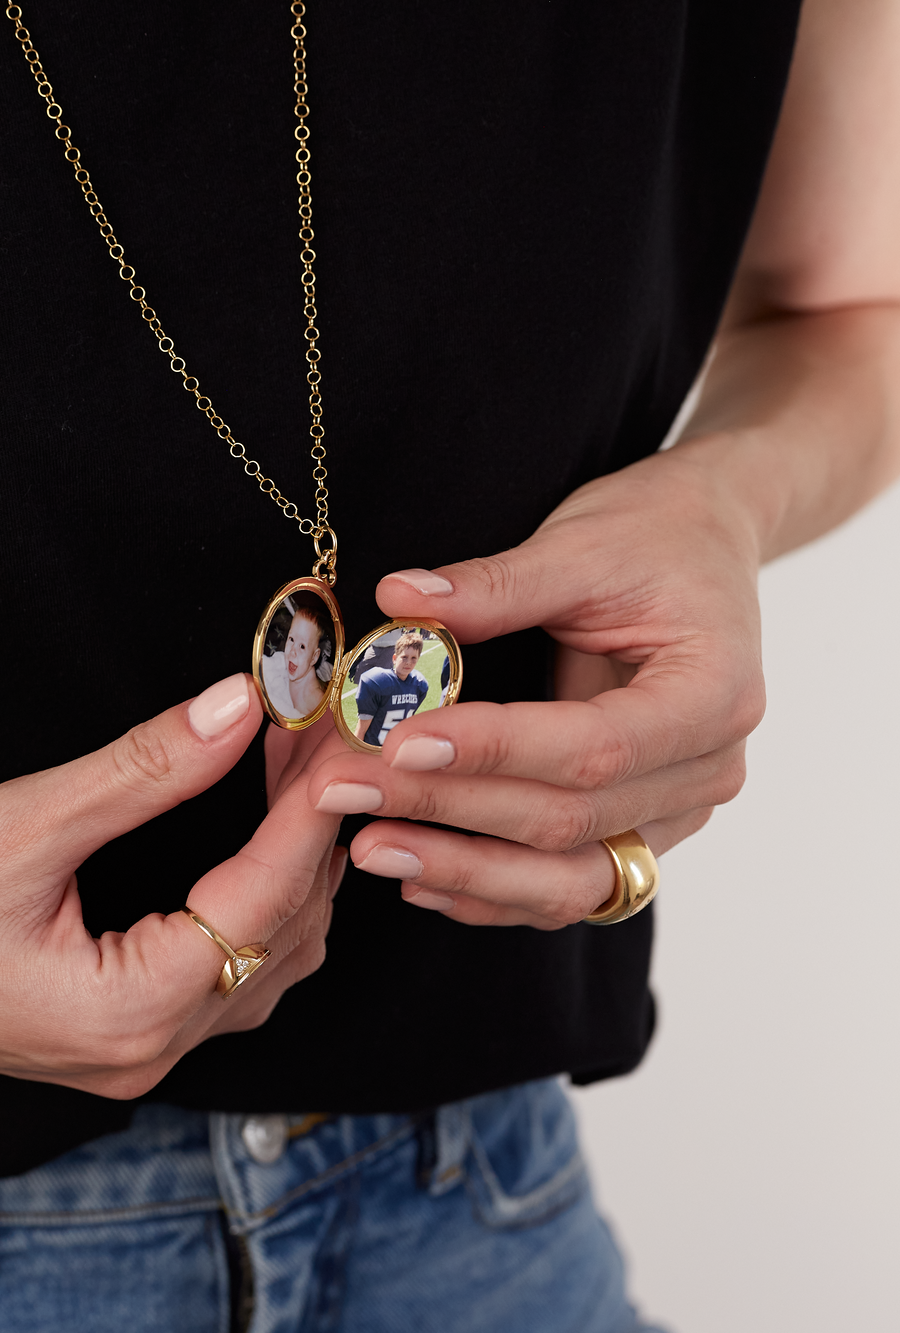 Cherished locket necklace designed to hold precious pictures of kids. This timeless piece is crafted to keep treasured memories close, perfect for capturing the love and joy of family